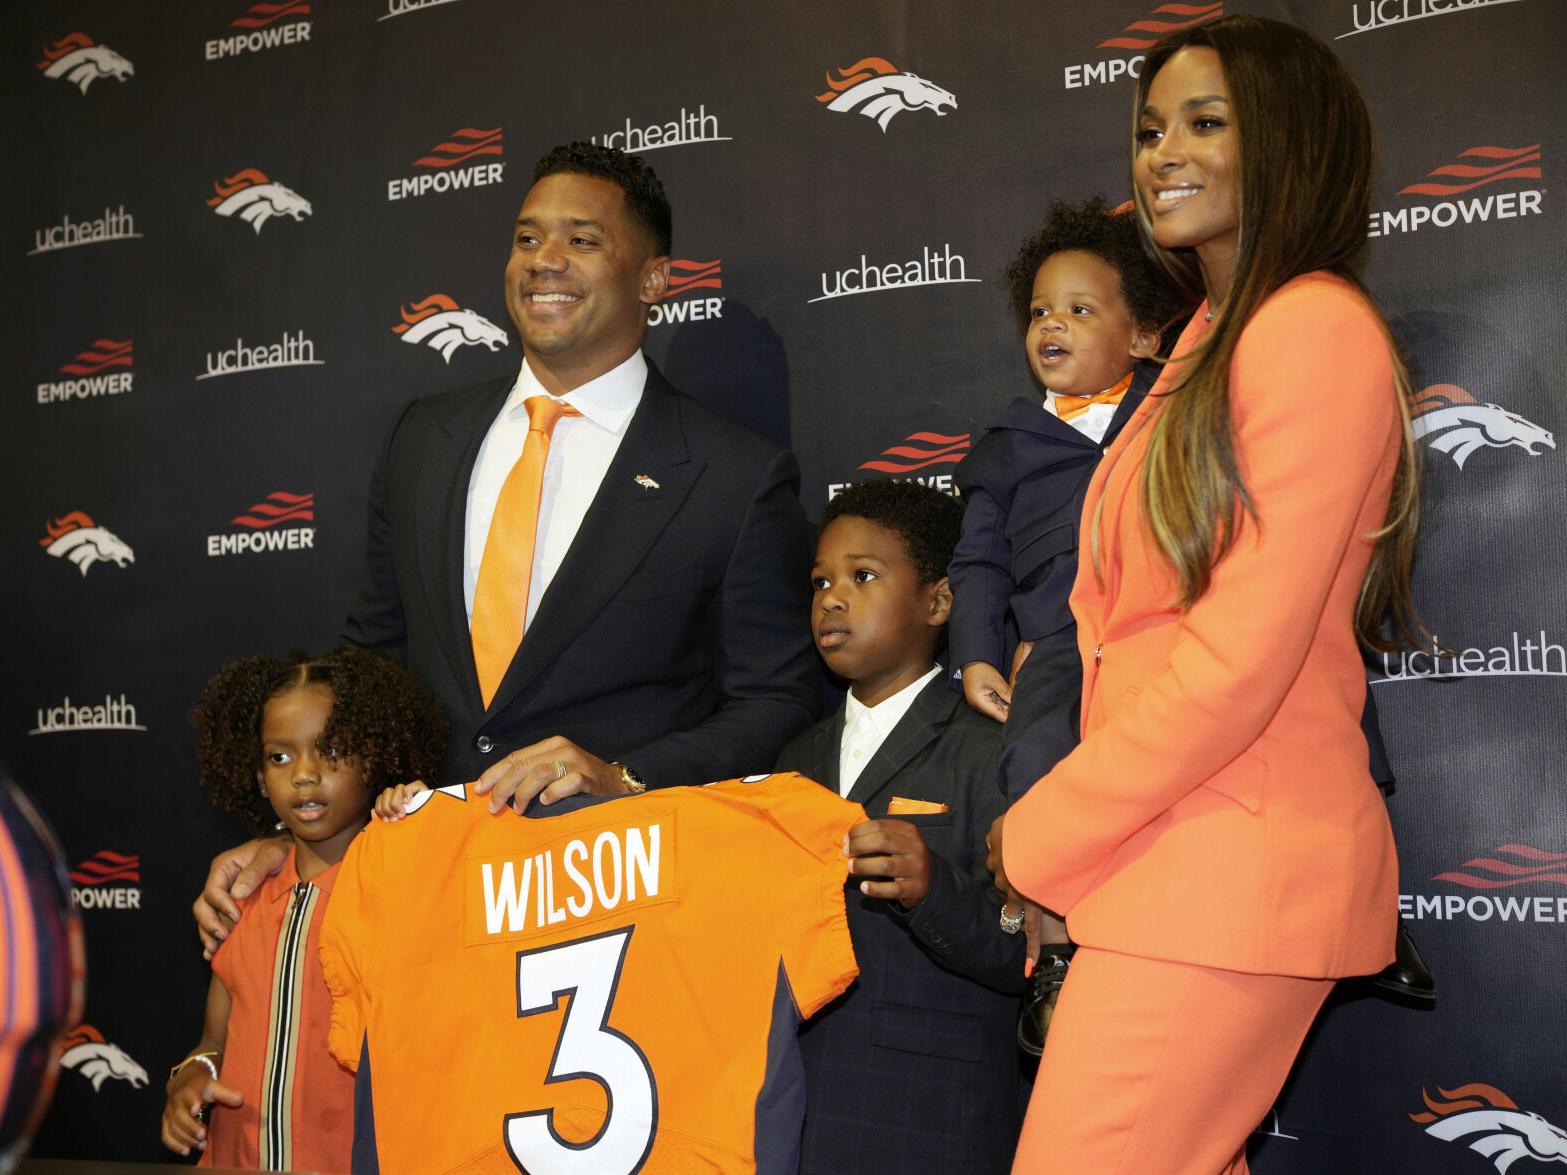 Denver Broncos Stock Watch: Russell Wilson shows signs of life